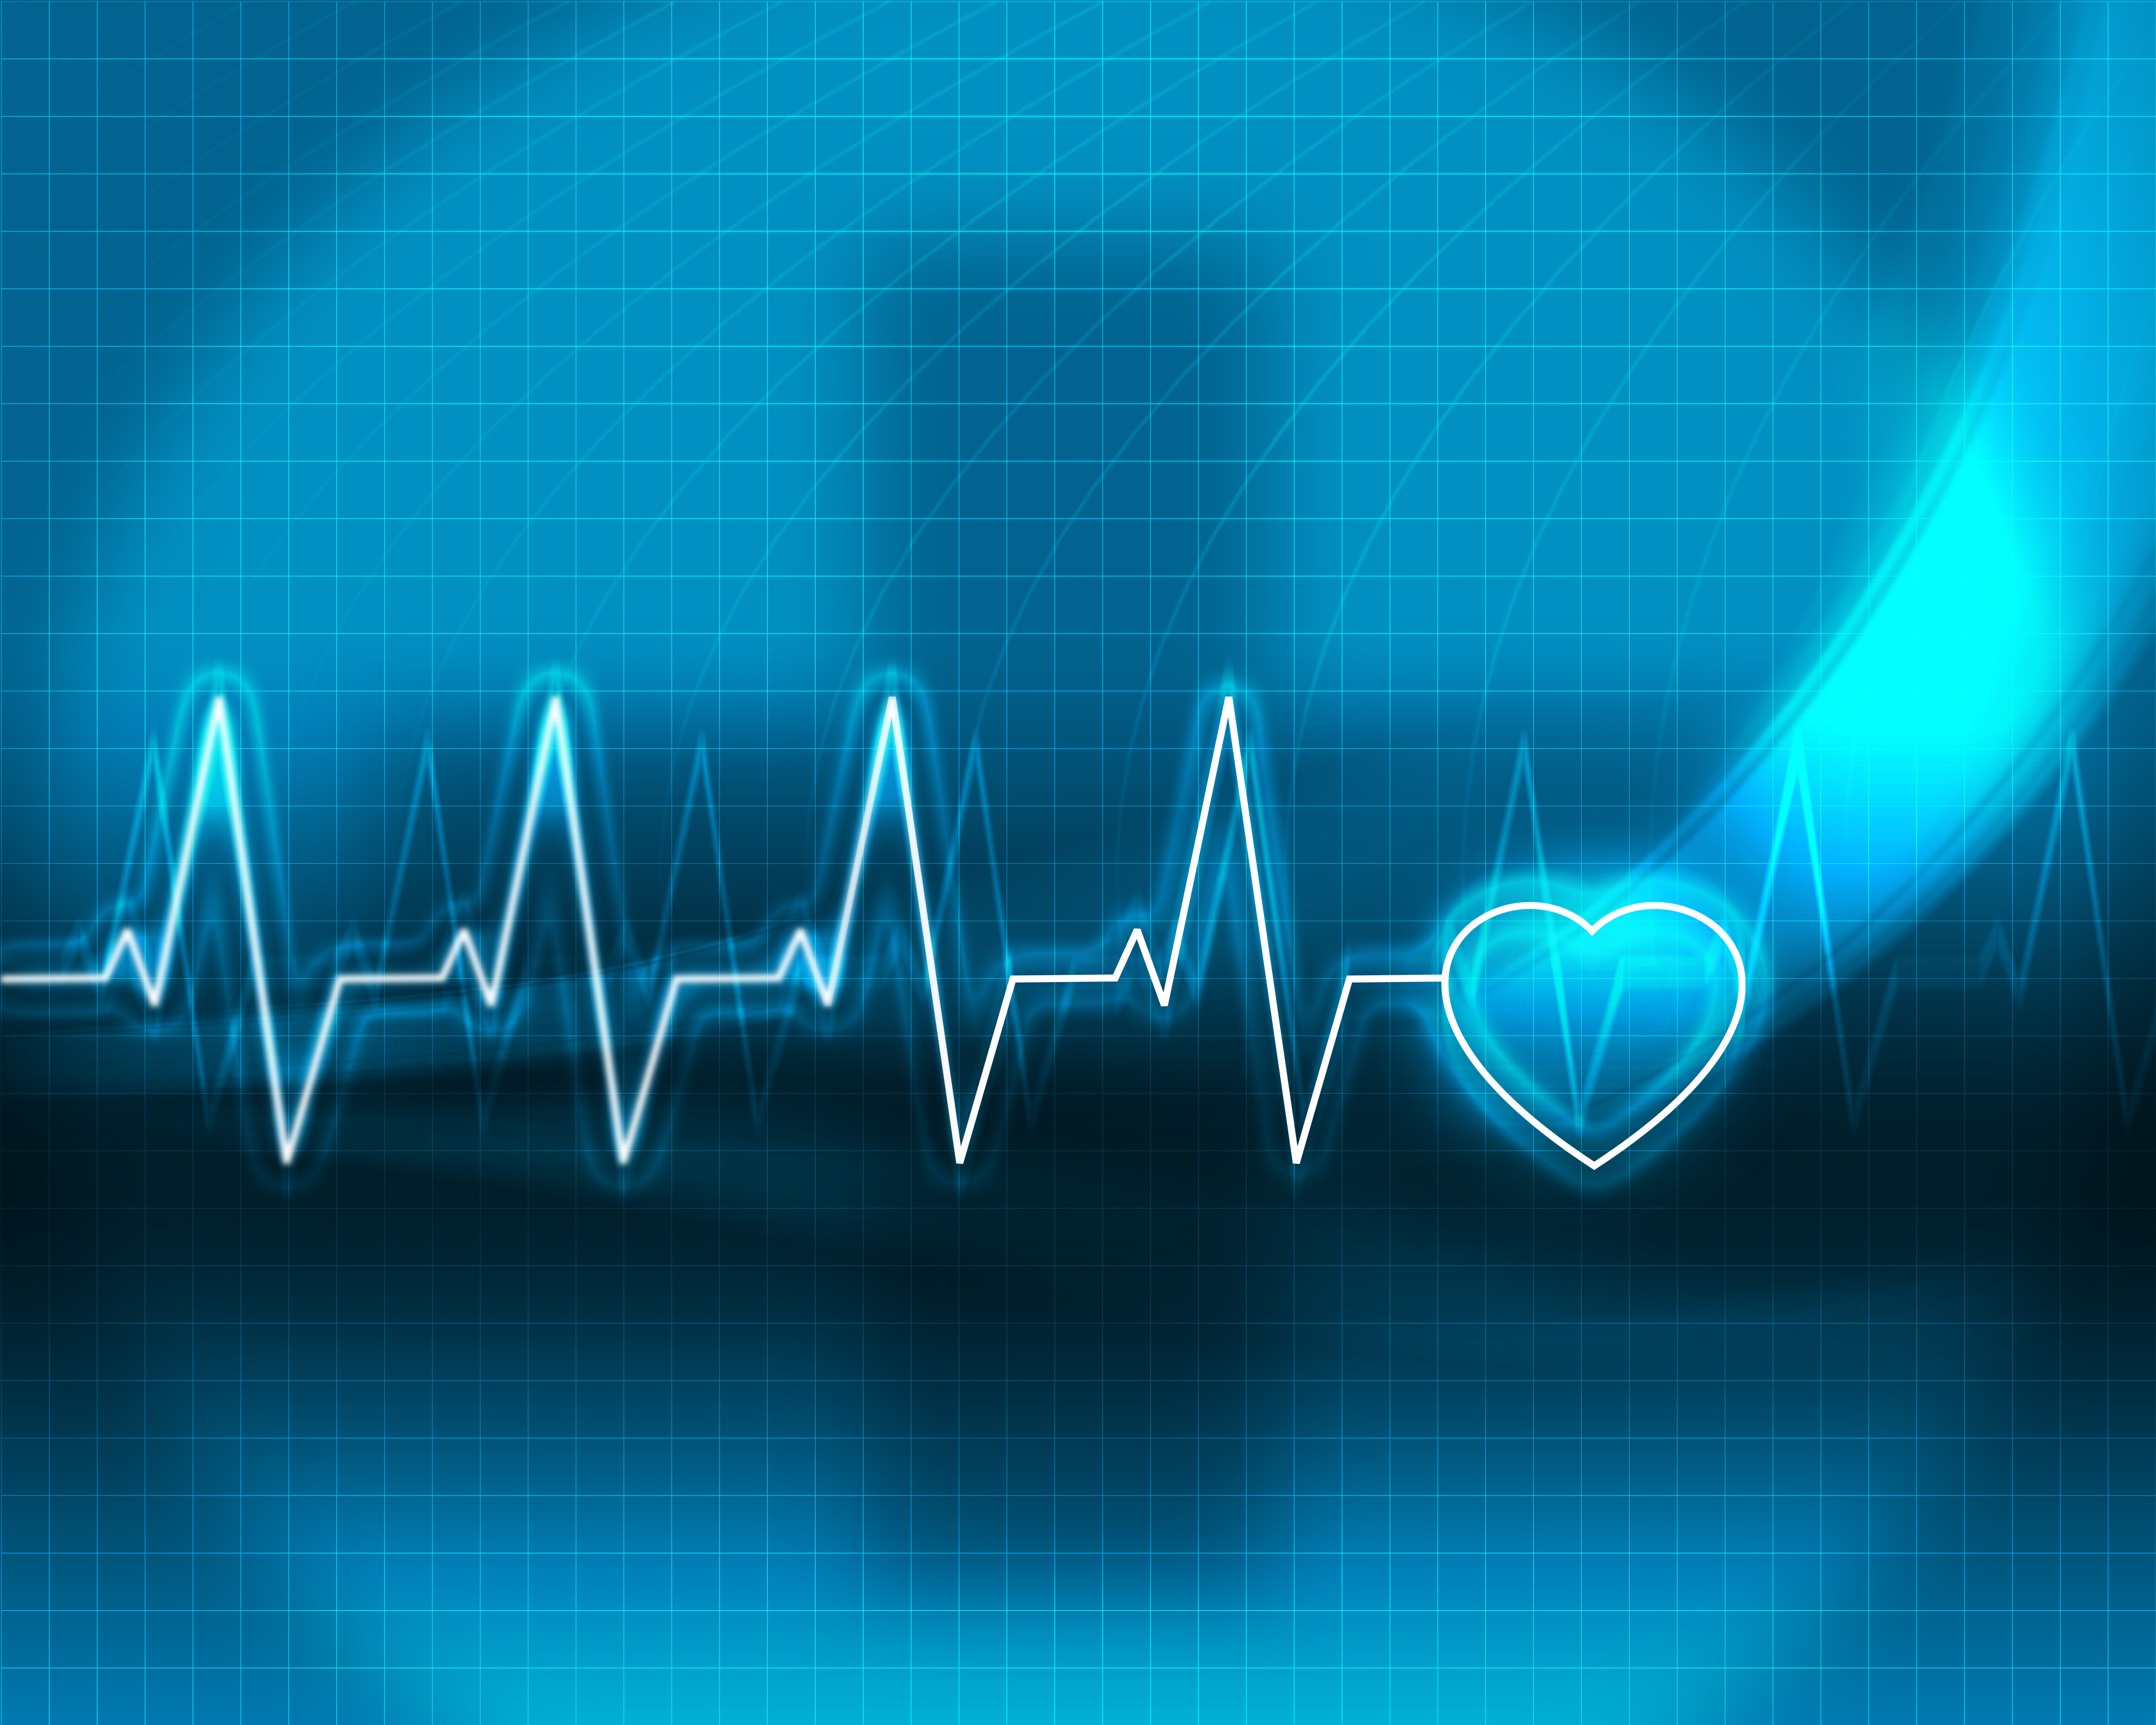 An illustration of a heart monitor